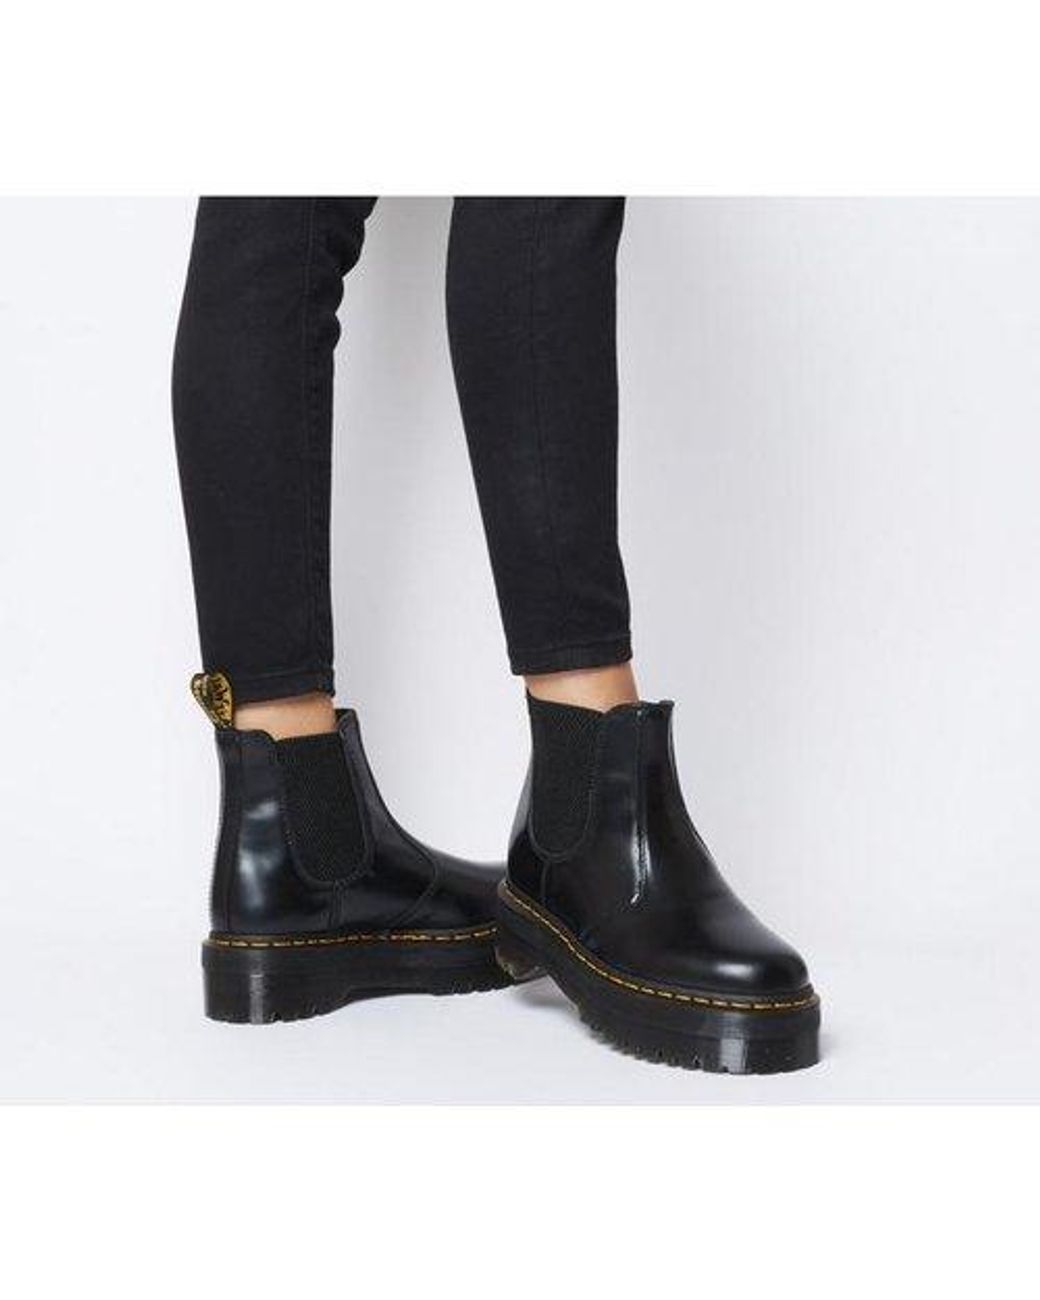 Dr. Martens Leather 2976 Quad Chelsea Boots in Black | Lyst Australia